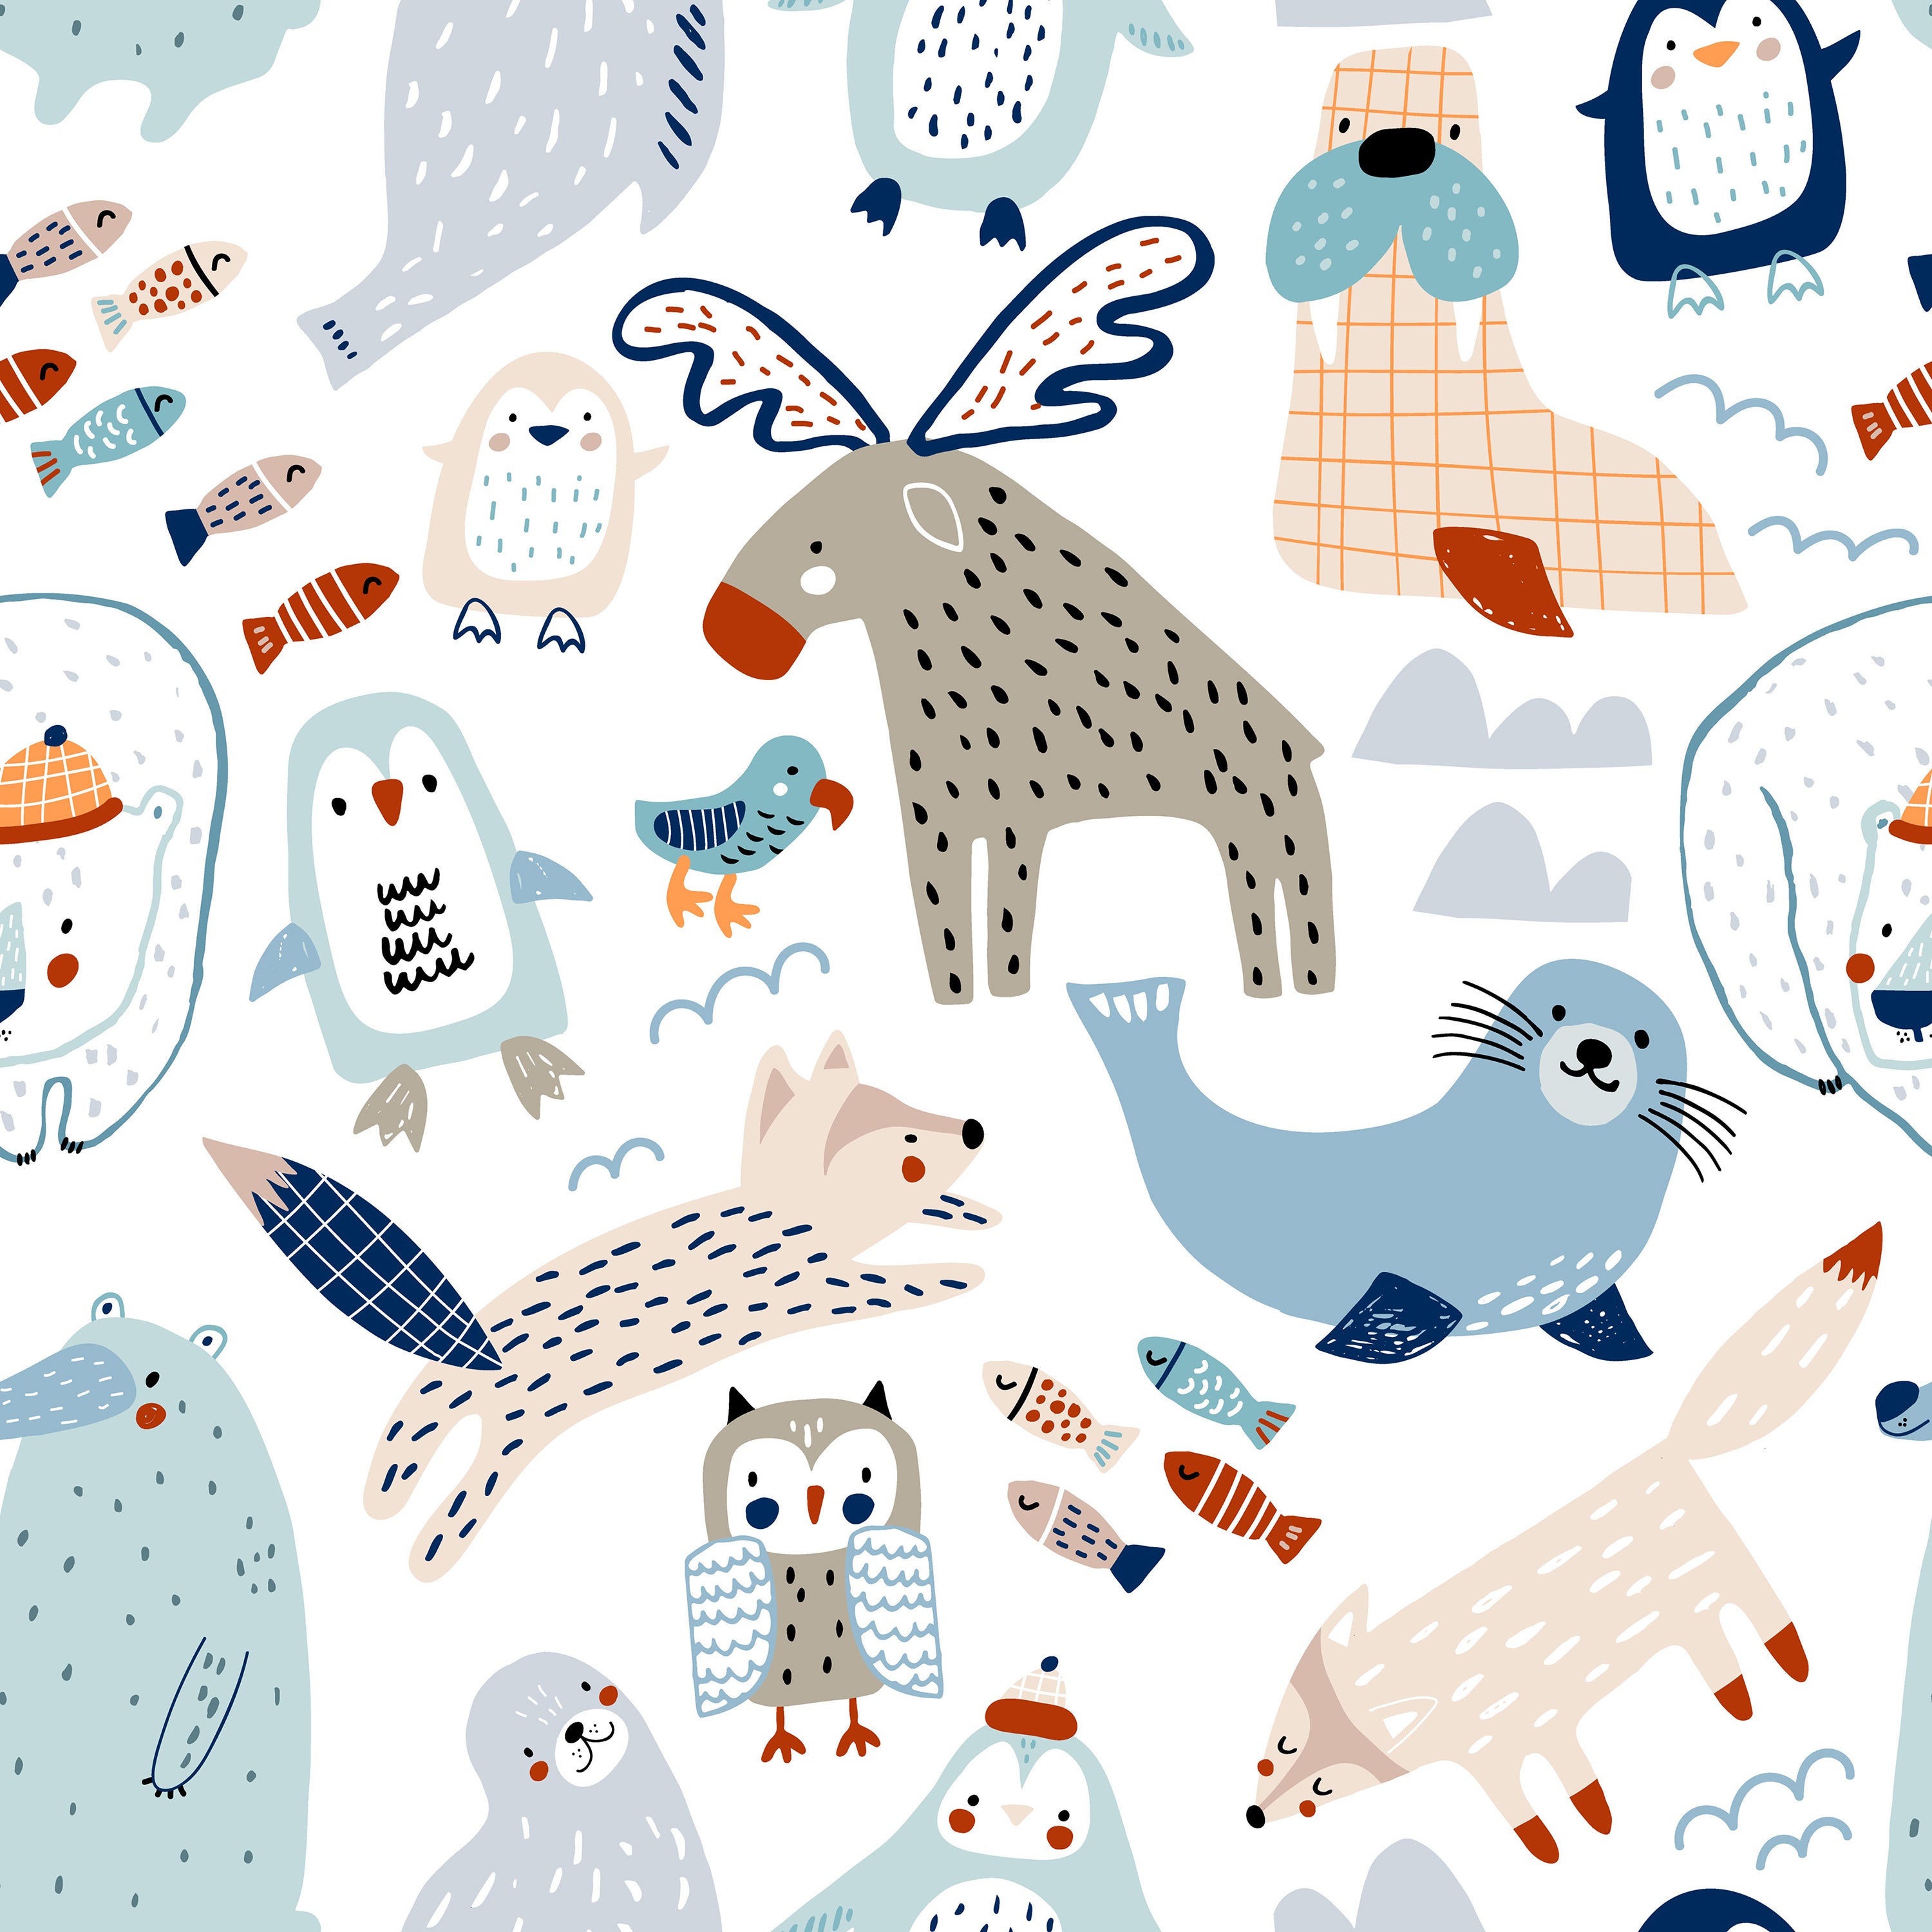 A seamless pattern featuring a whimsical collection of Nordic-inspired animals such as moose with wings, seals, foxes, owls, and penguins, all in a playful and colorful design on a light background.